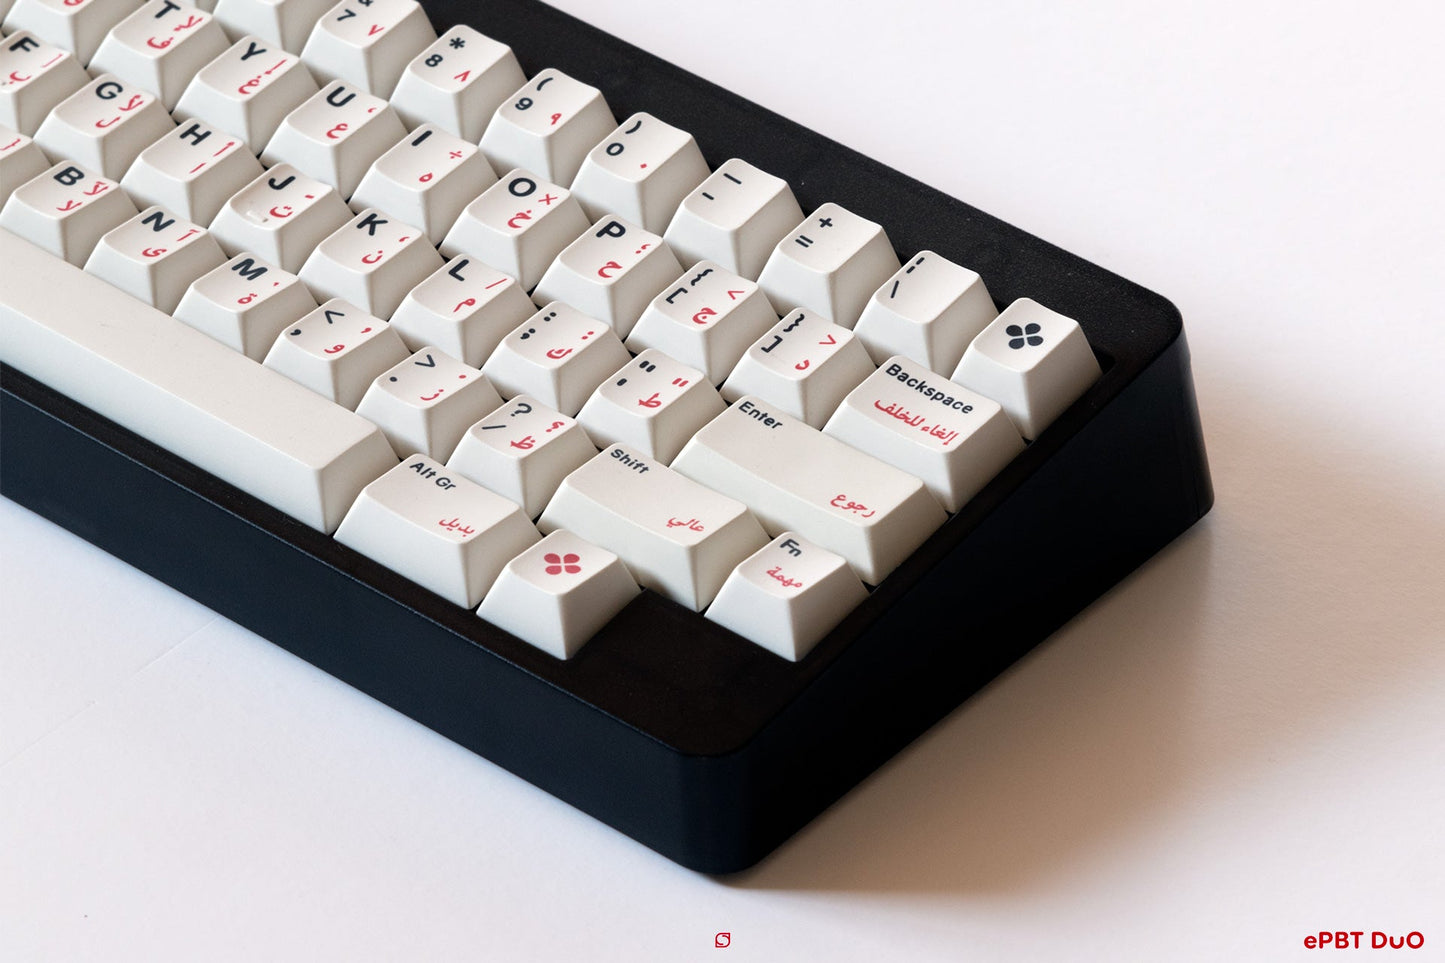 In Stock) Angry Miao Glacier Keycaps – proto[Typist] Keyboards